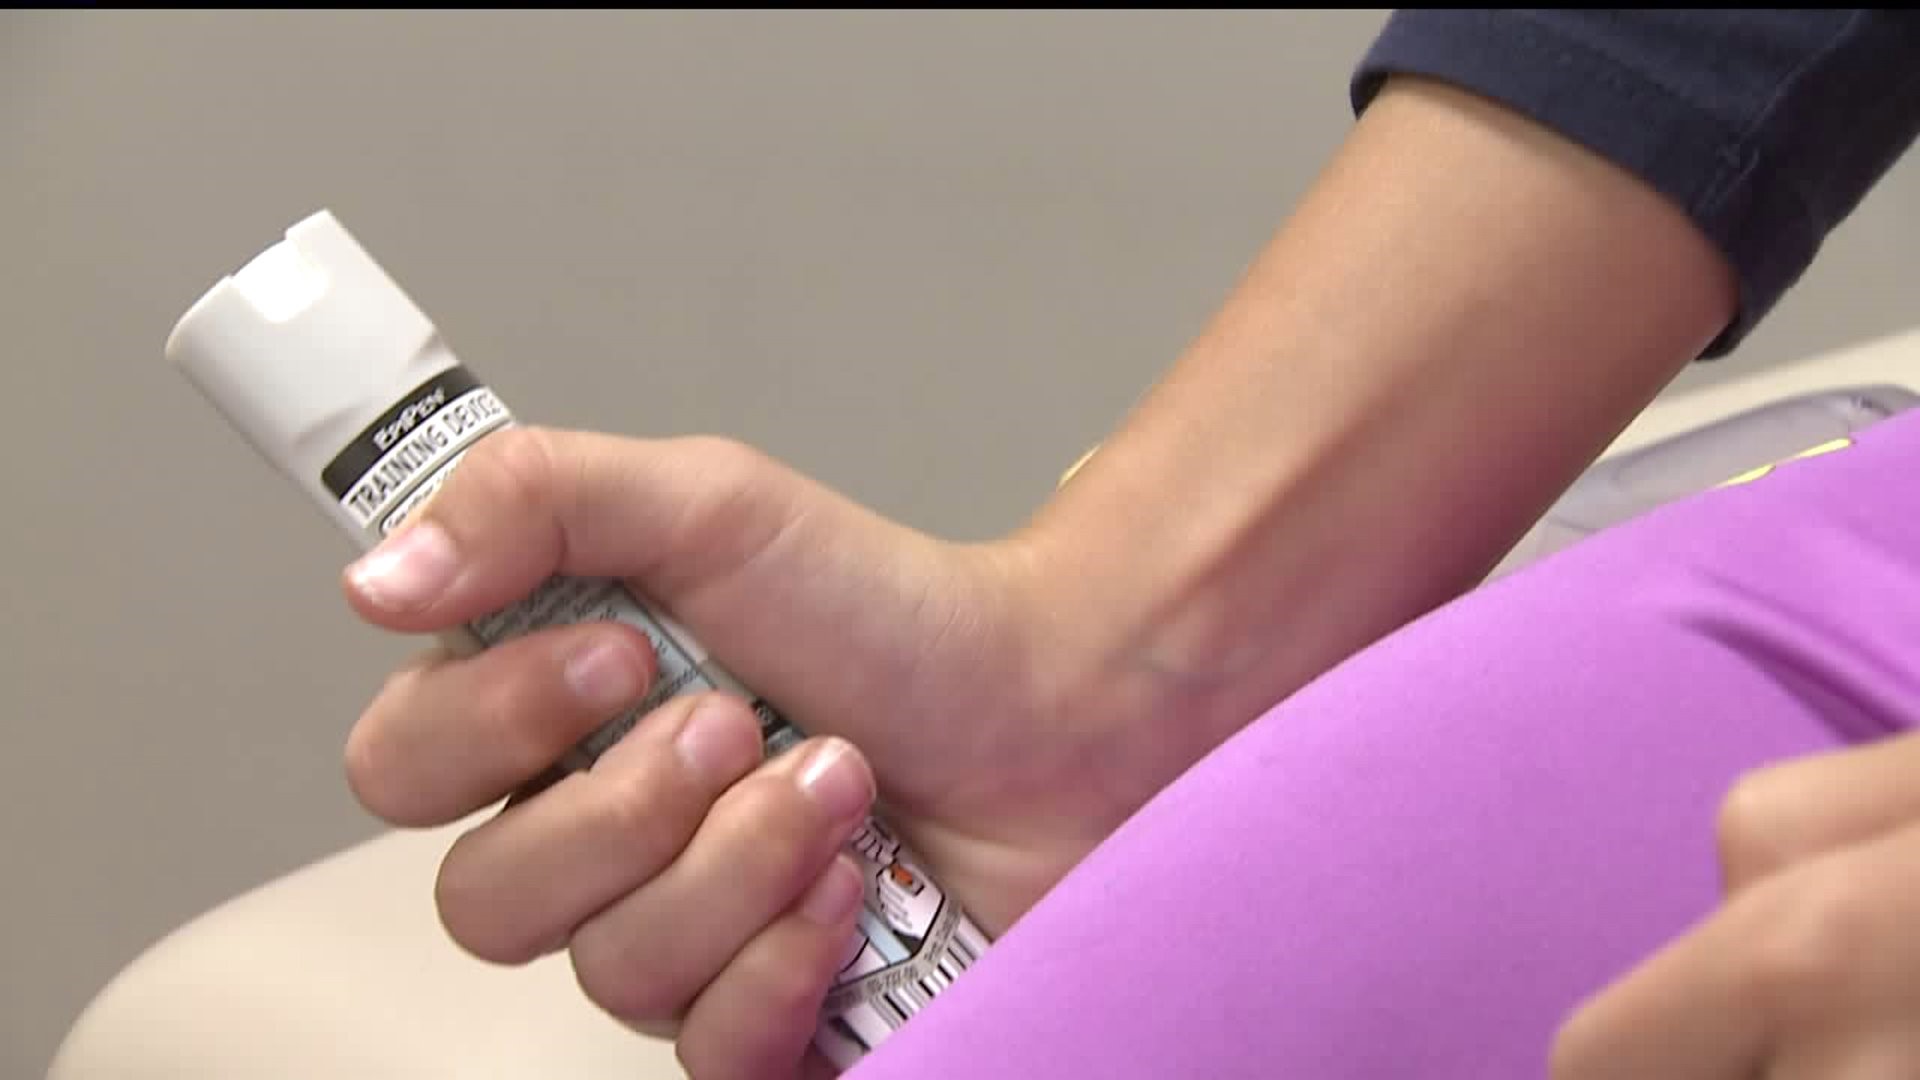 New EpiPen Law in Illinois